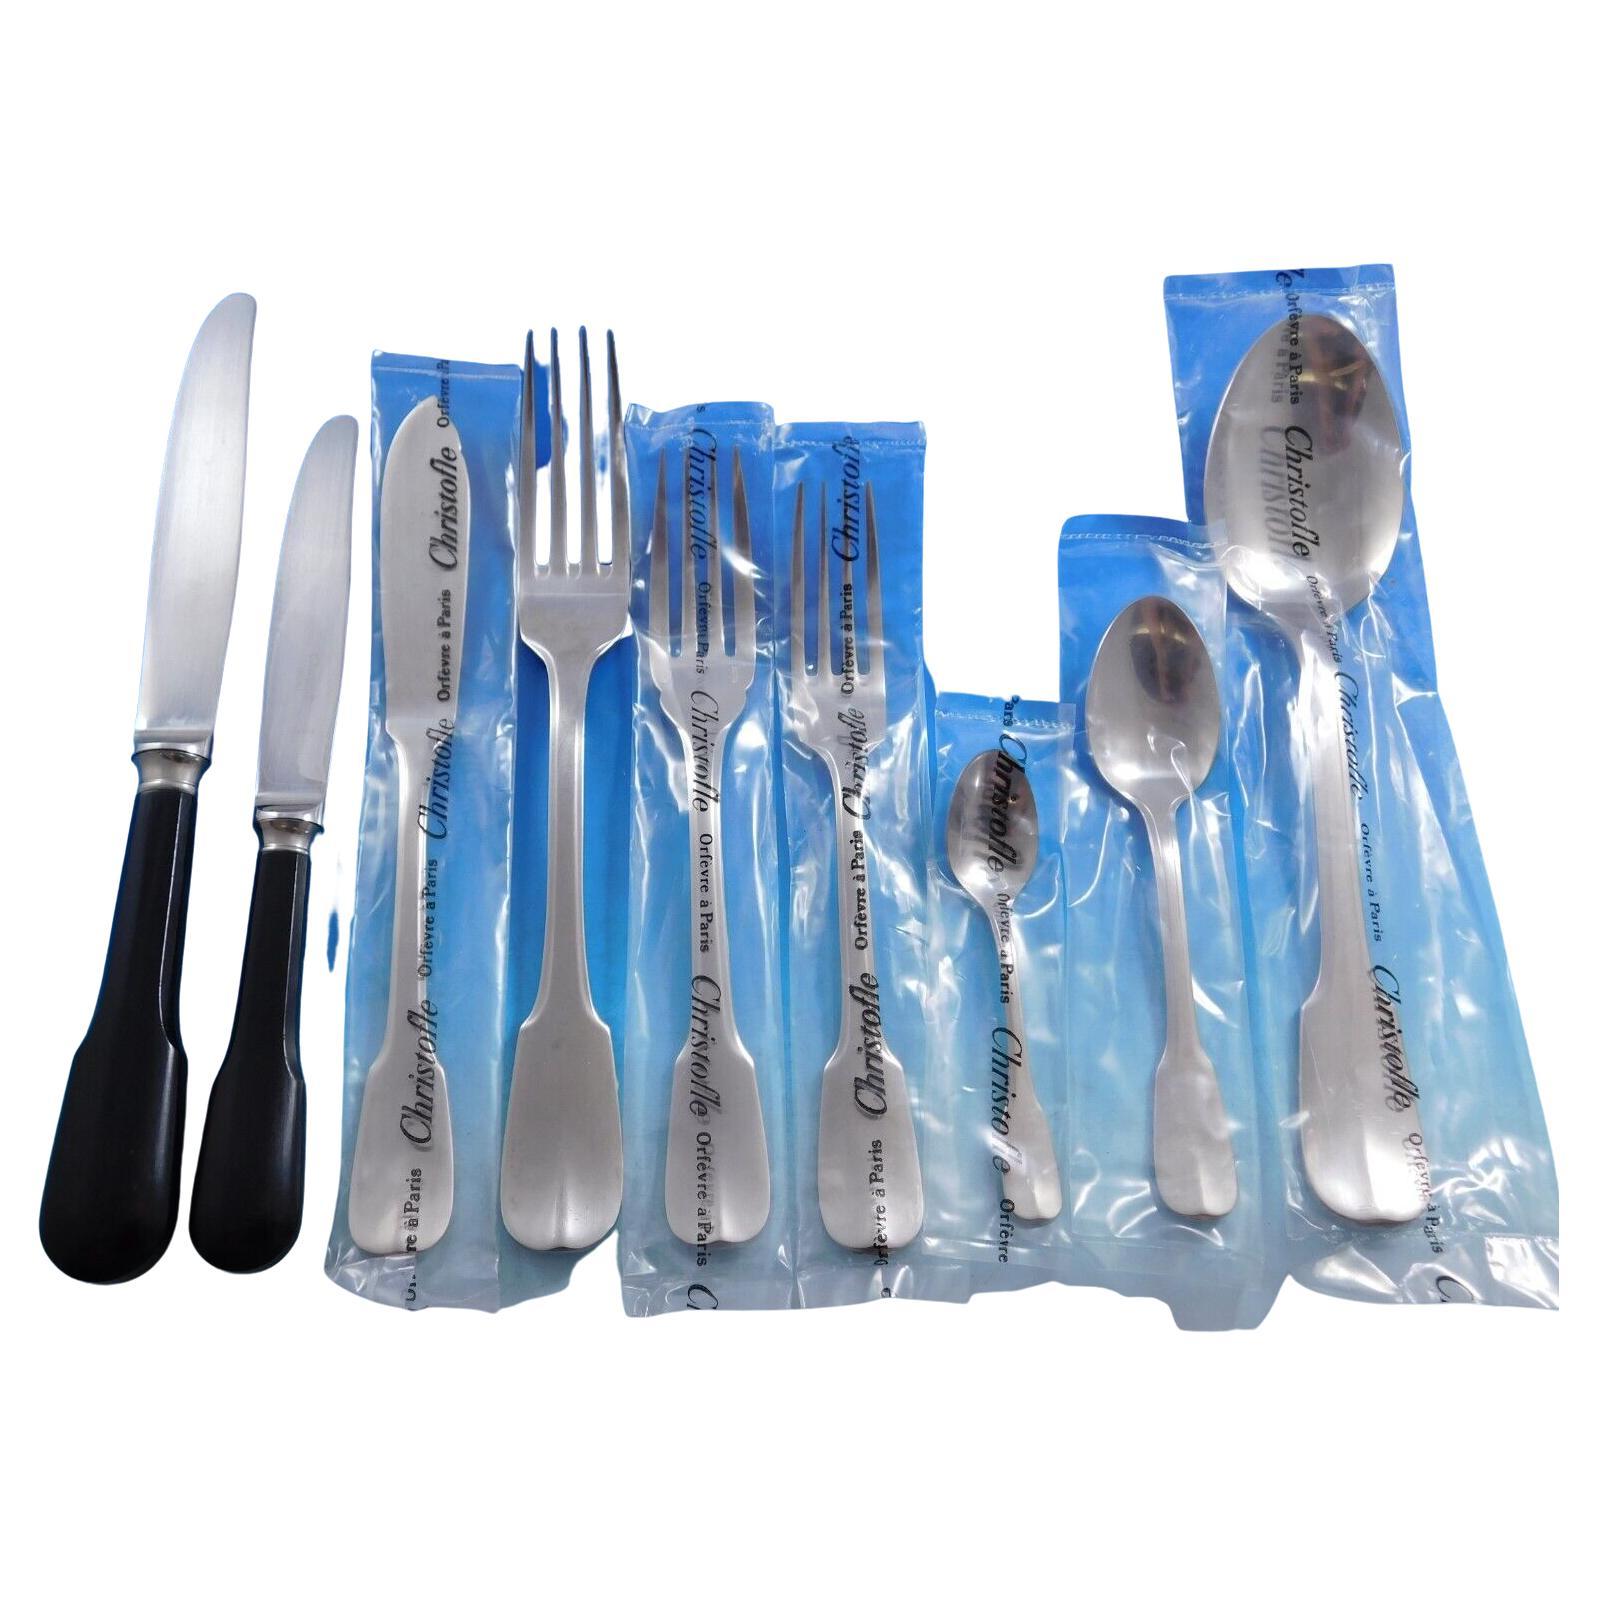 Bearn by Christofle France Stainless Steel Flatware Service Set 110 pcs Dinner For Sale